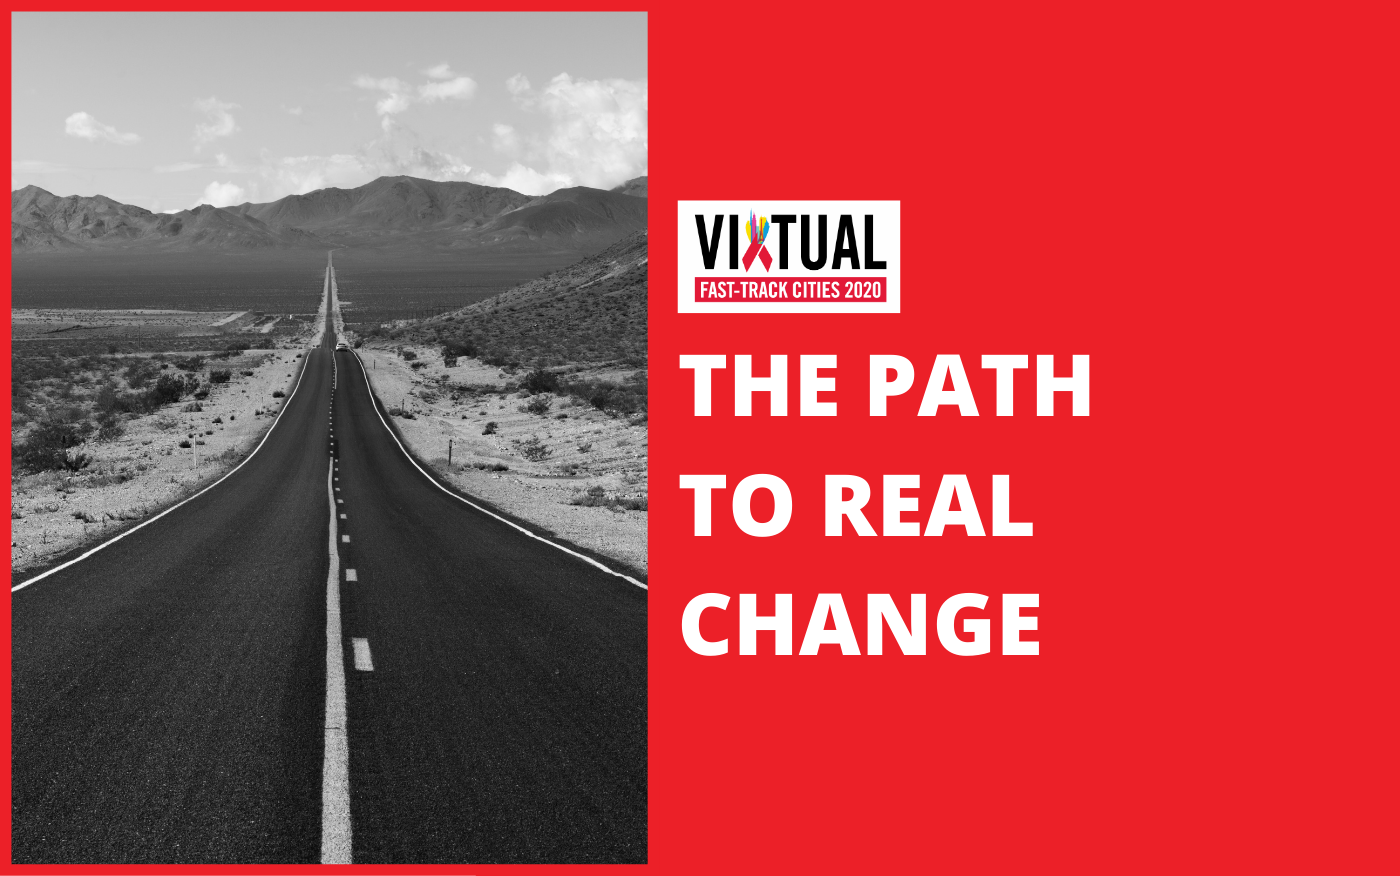 The Path to Real Change